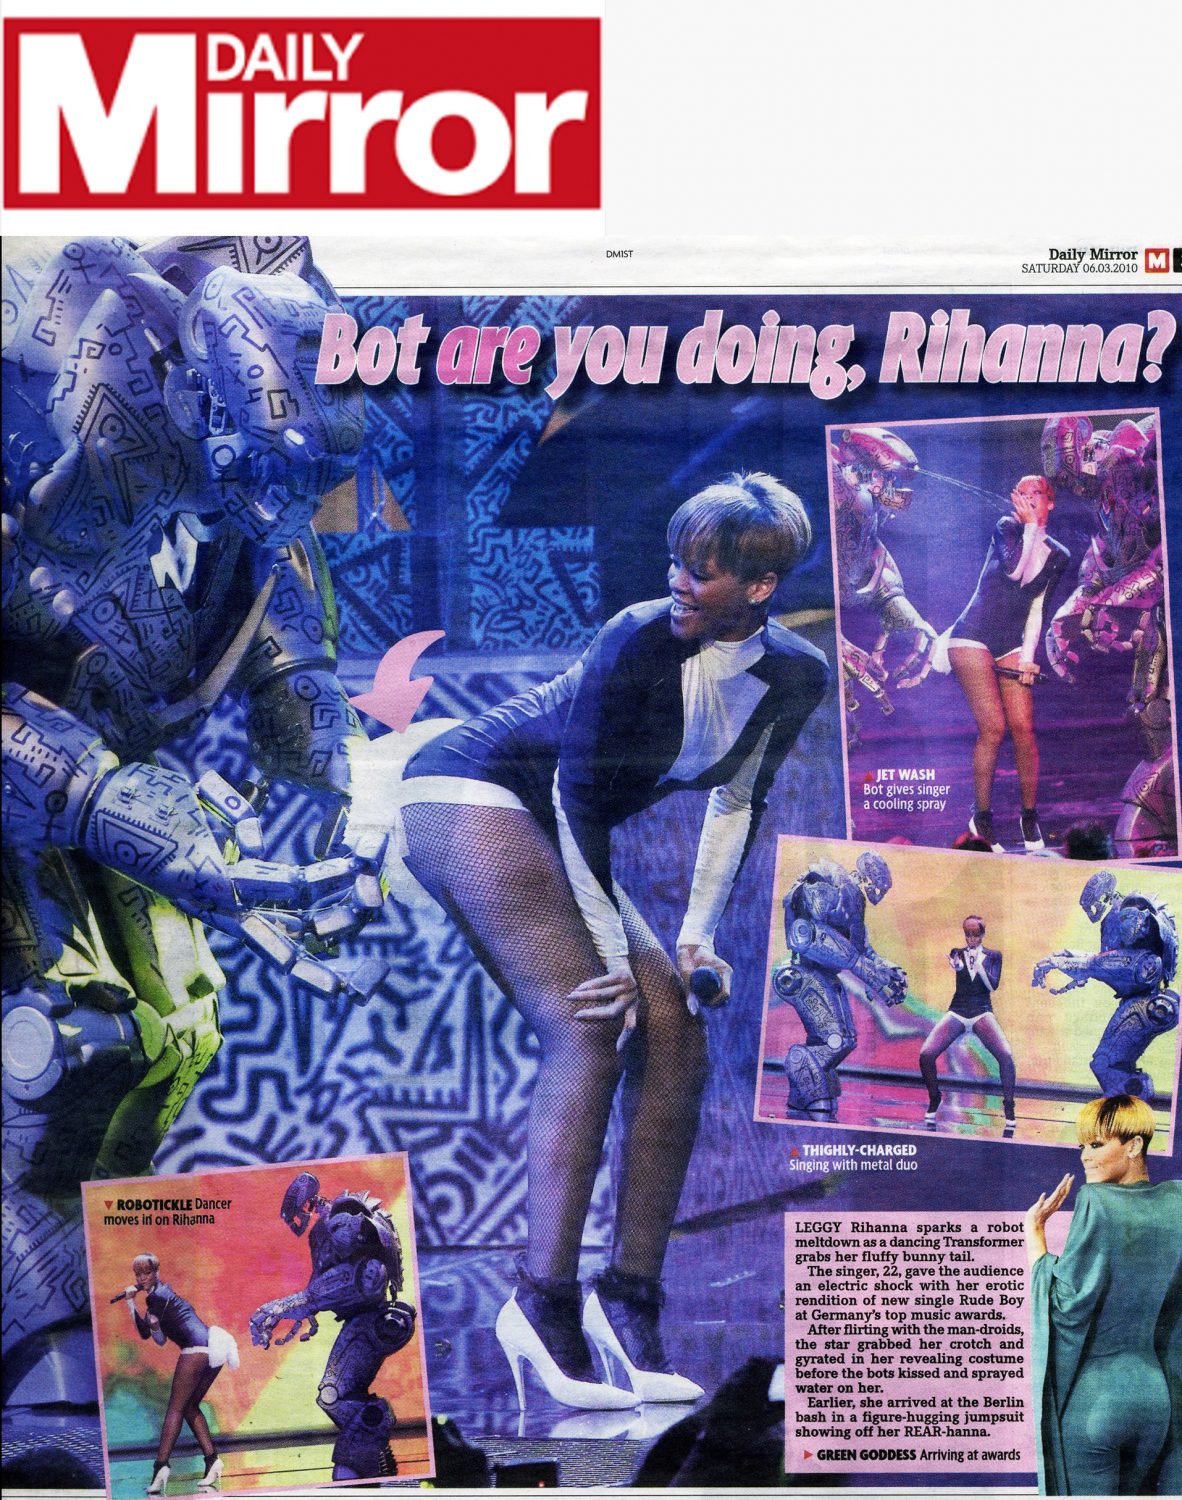 Titan the Robot with Rihanna in the Daily Mirror newspaper.